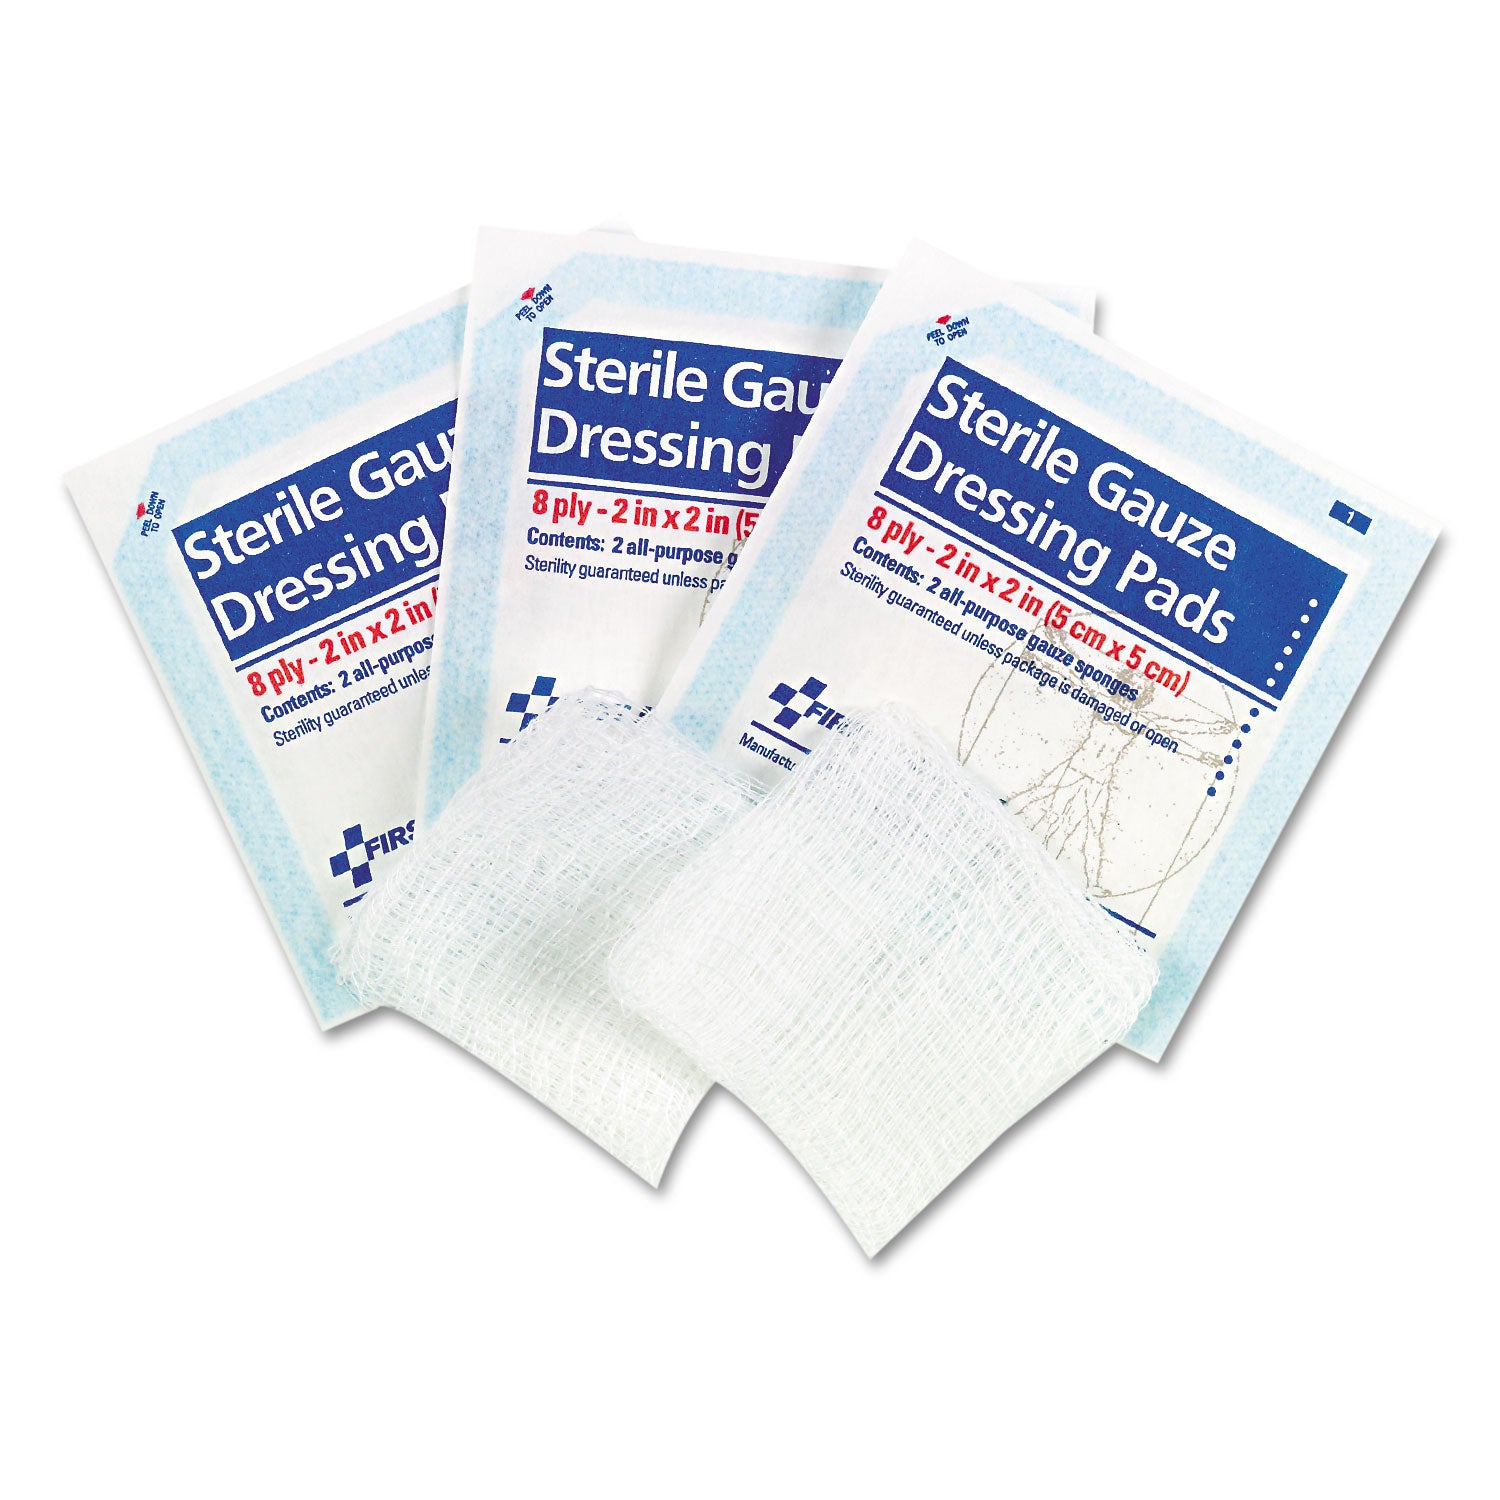 SmartCompliance Gauze Pads, Sterile, 8-Ply, 2 x 2, 5 Dual-Pads/Pack - 